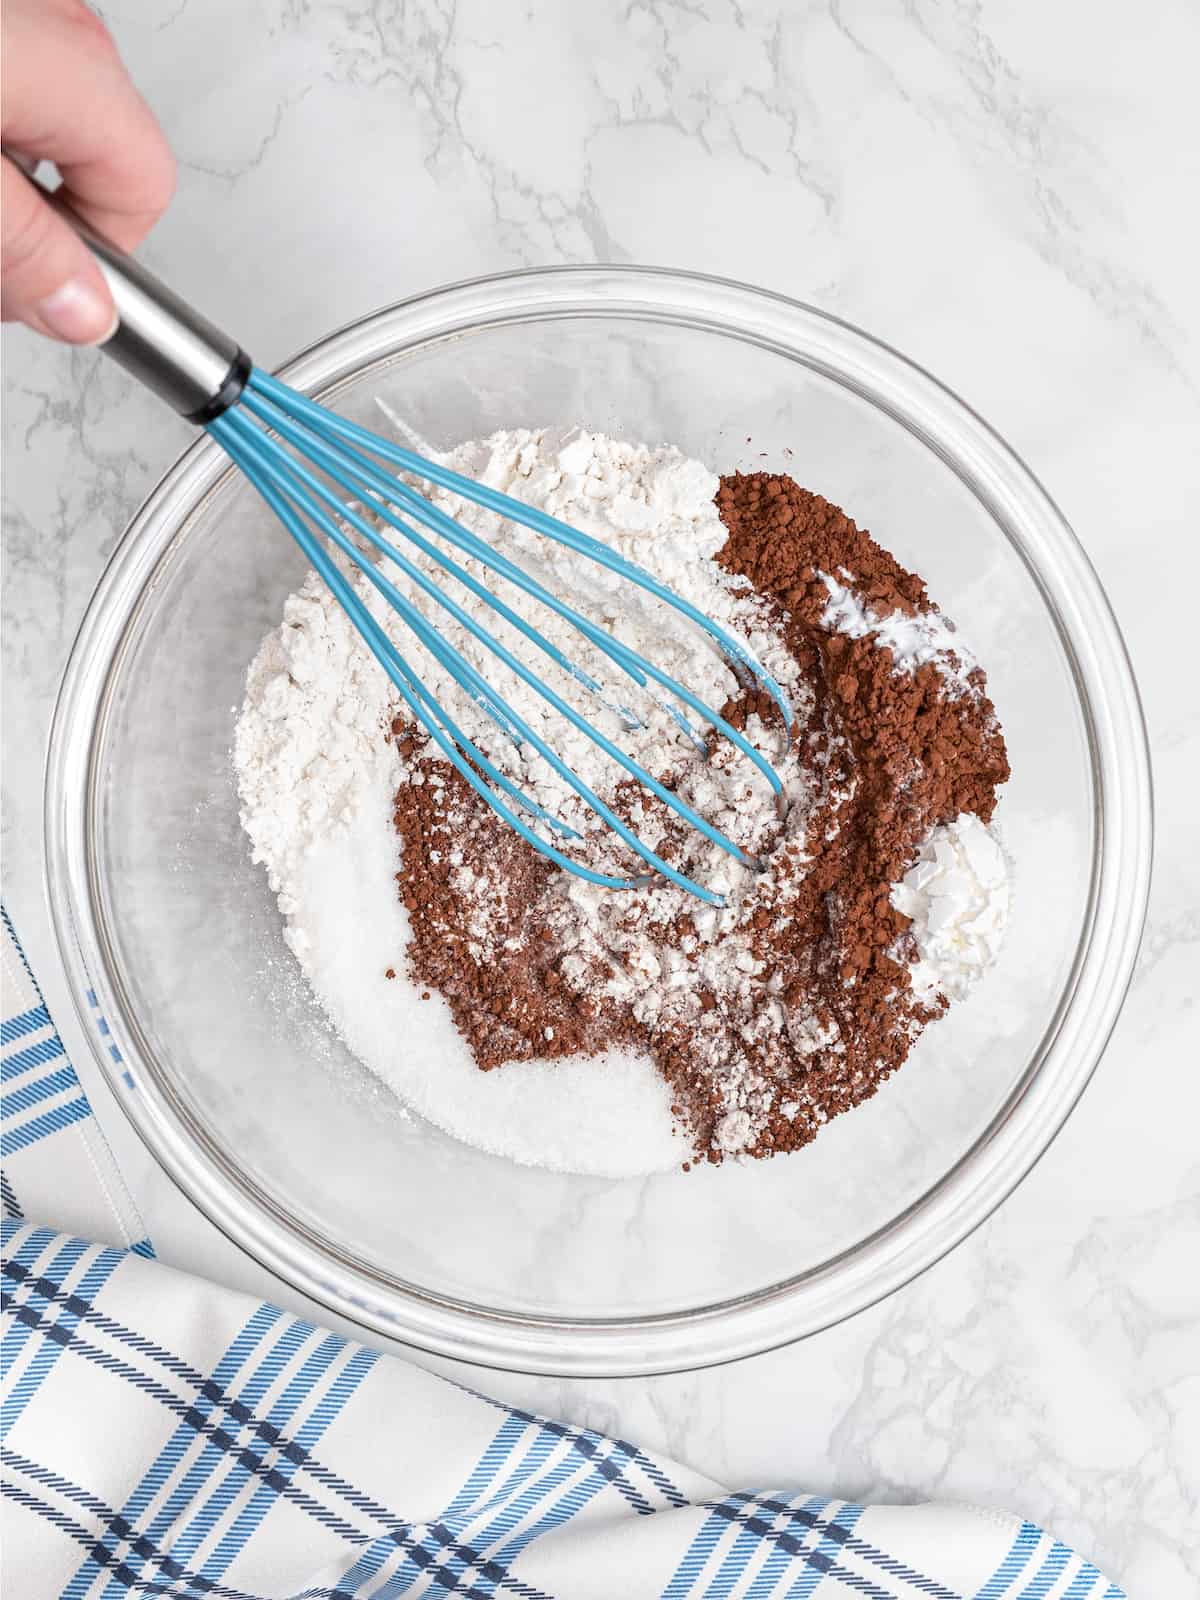 The ingredients for chocolate cookies are whisked together in a mixing bowl.